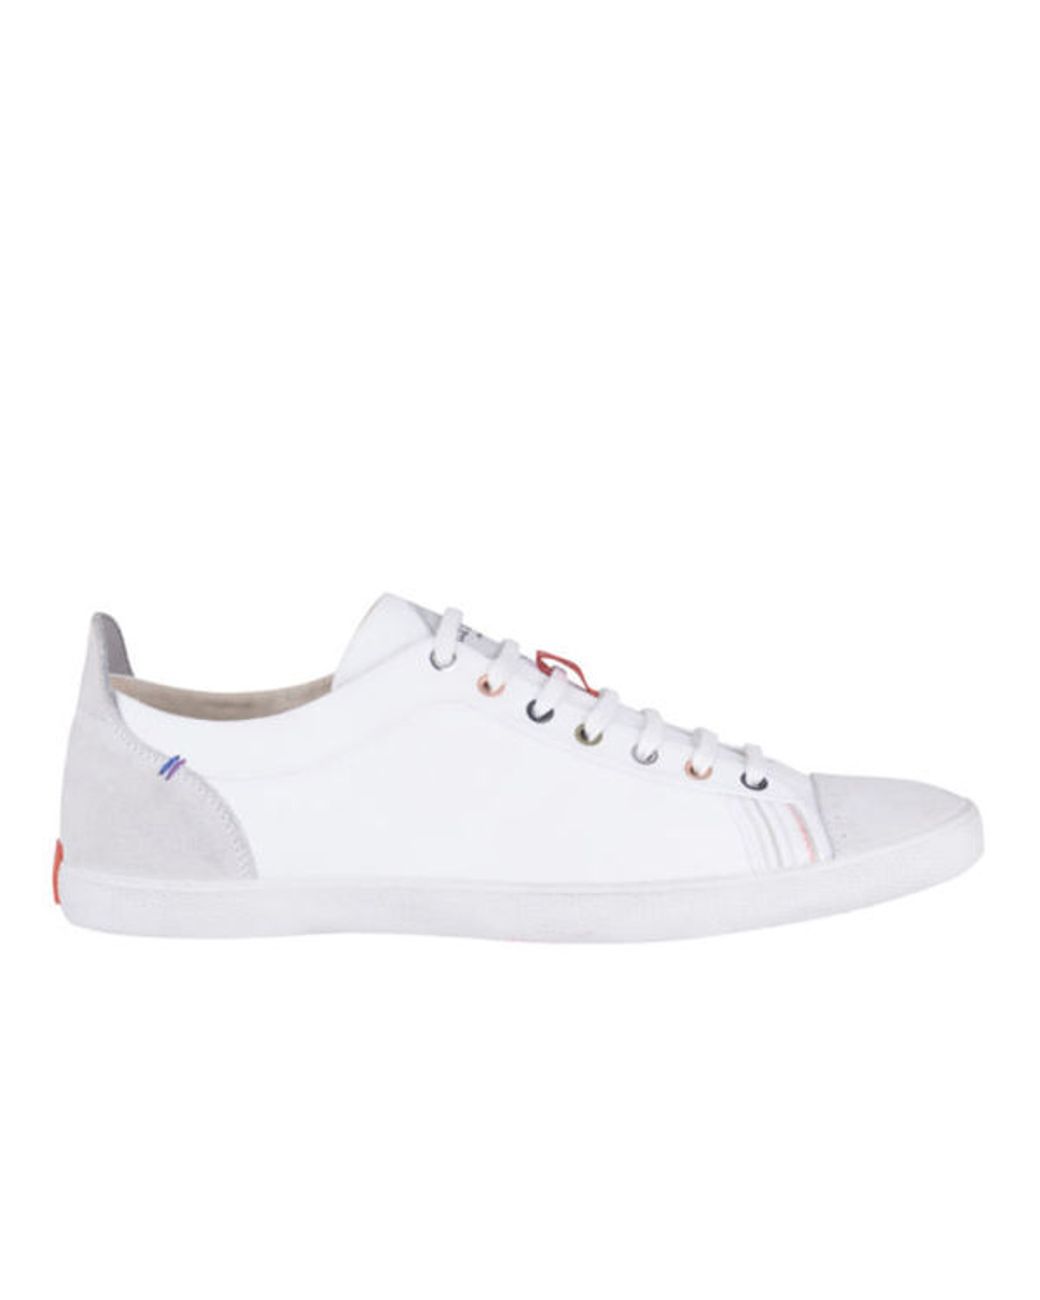 Paul Smith Mens Vestri Leather Trainers in White for Men | Lyst UK